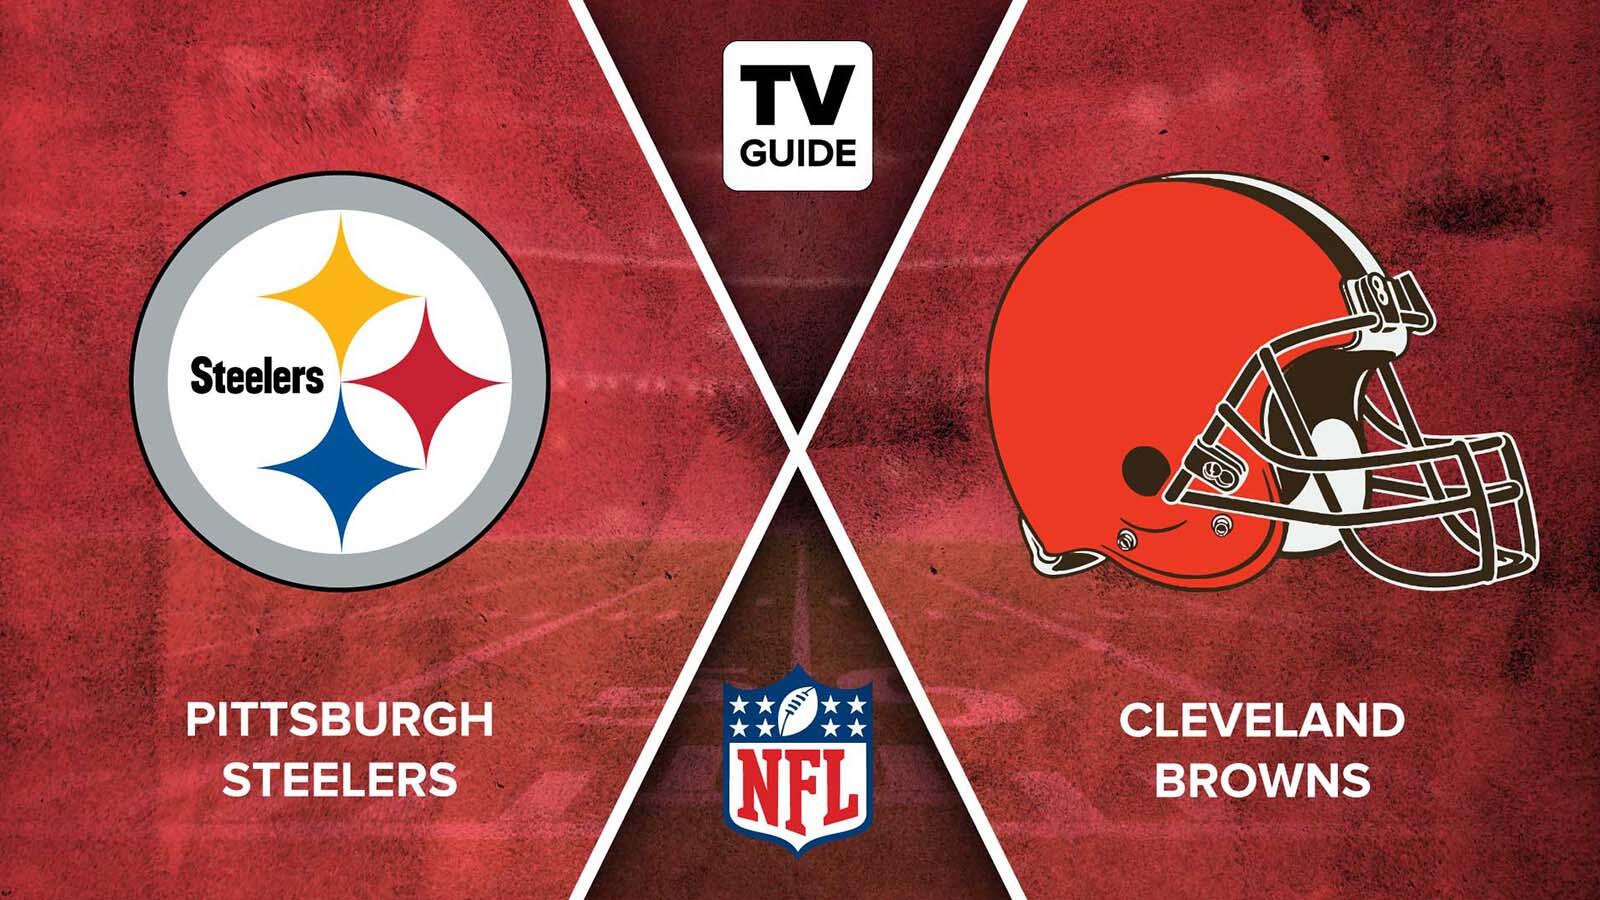 How to Watch TNF Steelers vs. Browns Live on 09/22 - TV Guide